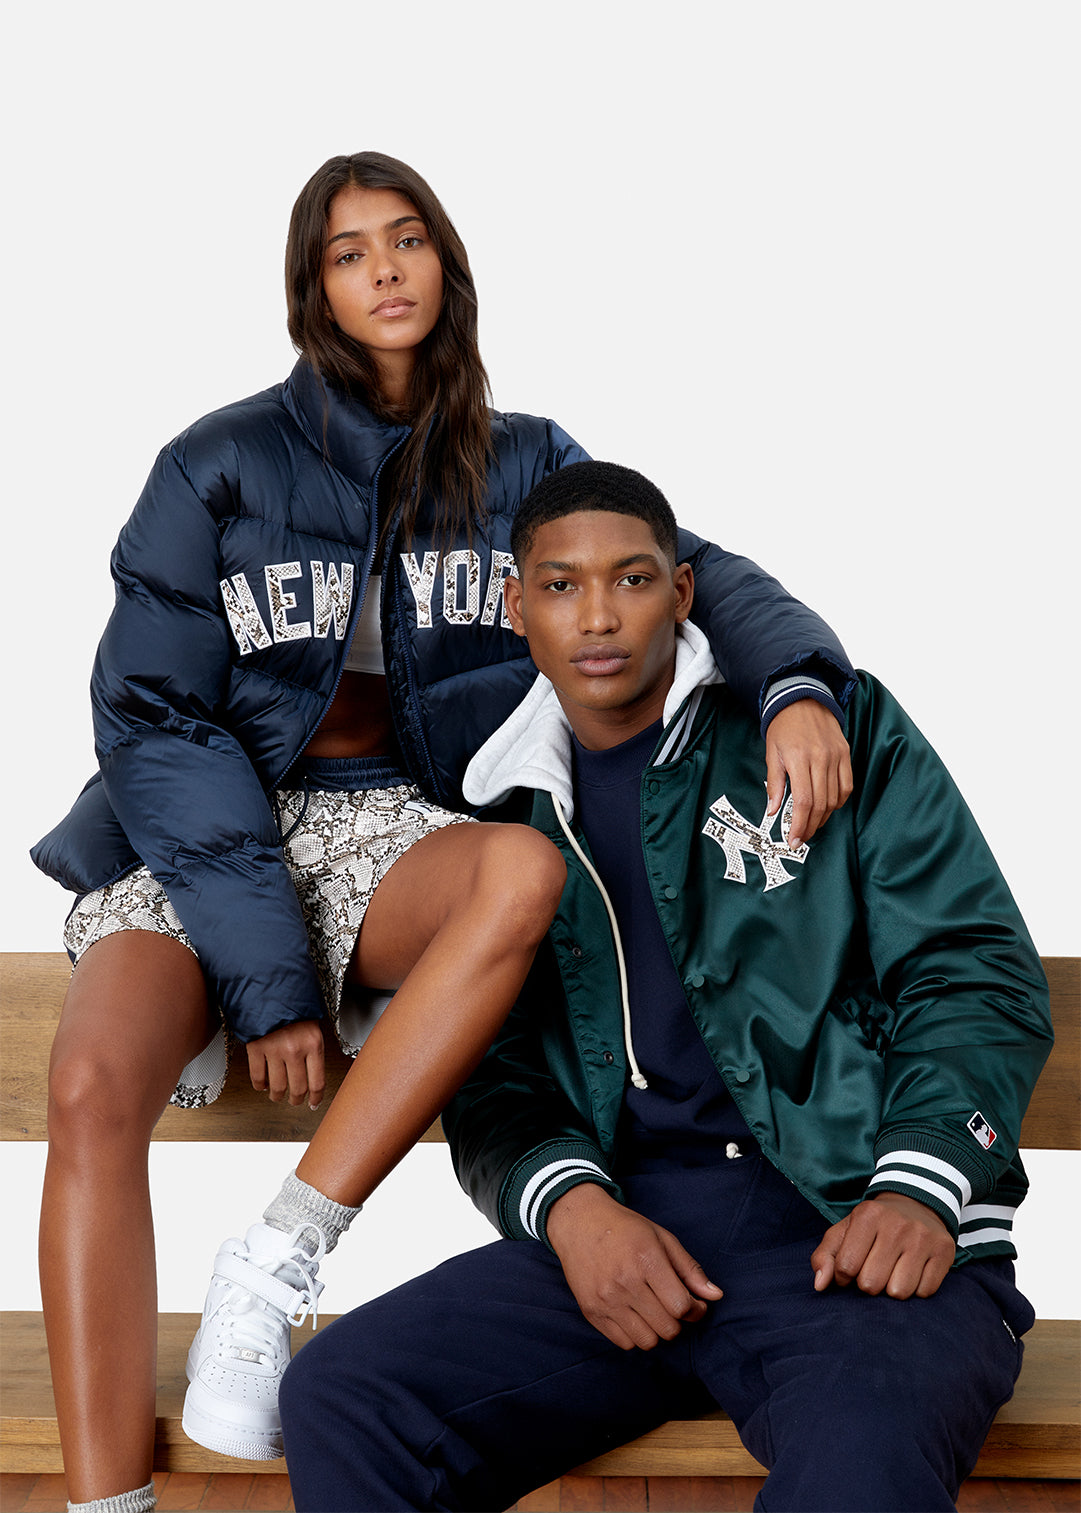 KITH x MLB Fall 2020 Yankees & Dodgers Release Date